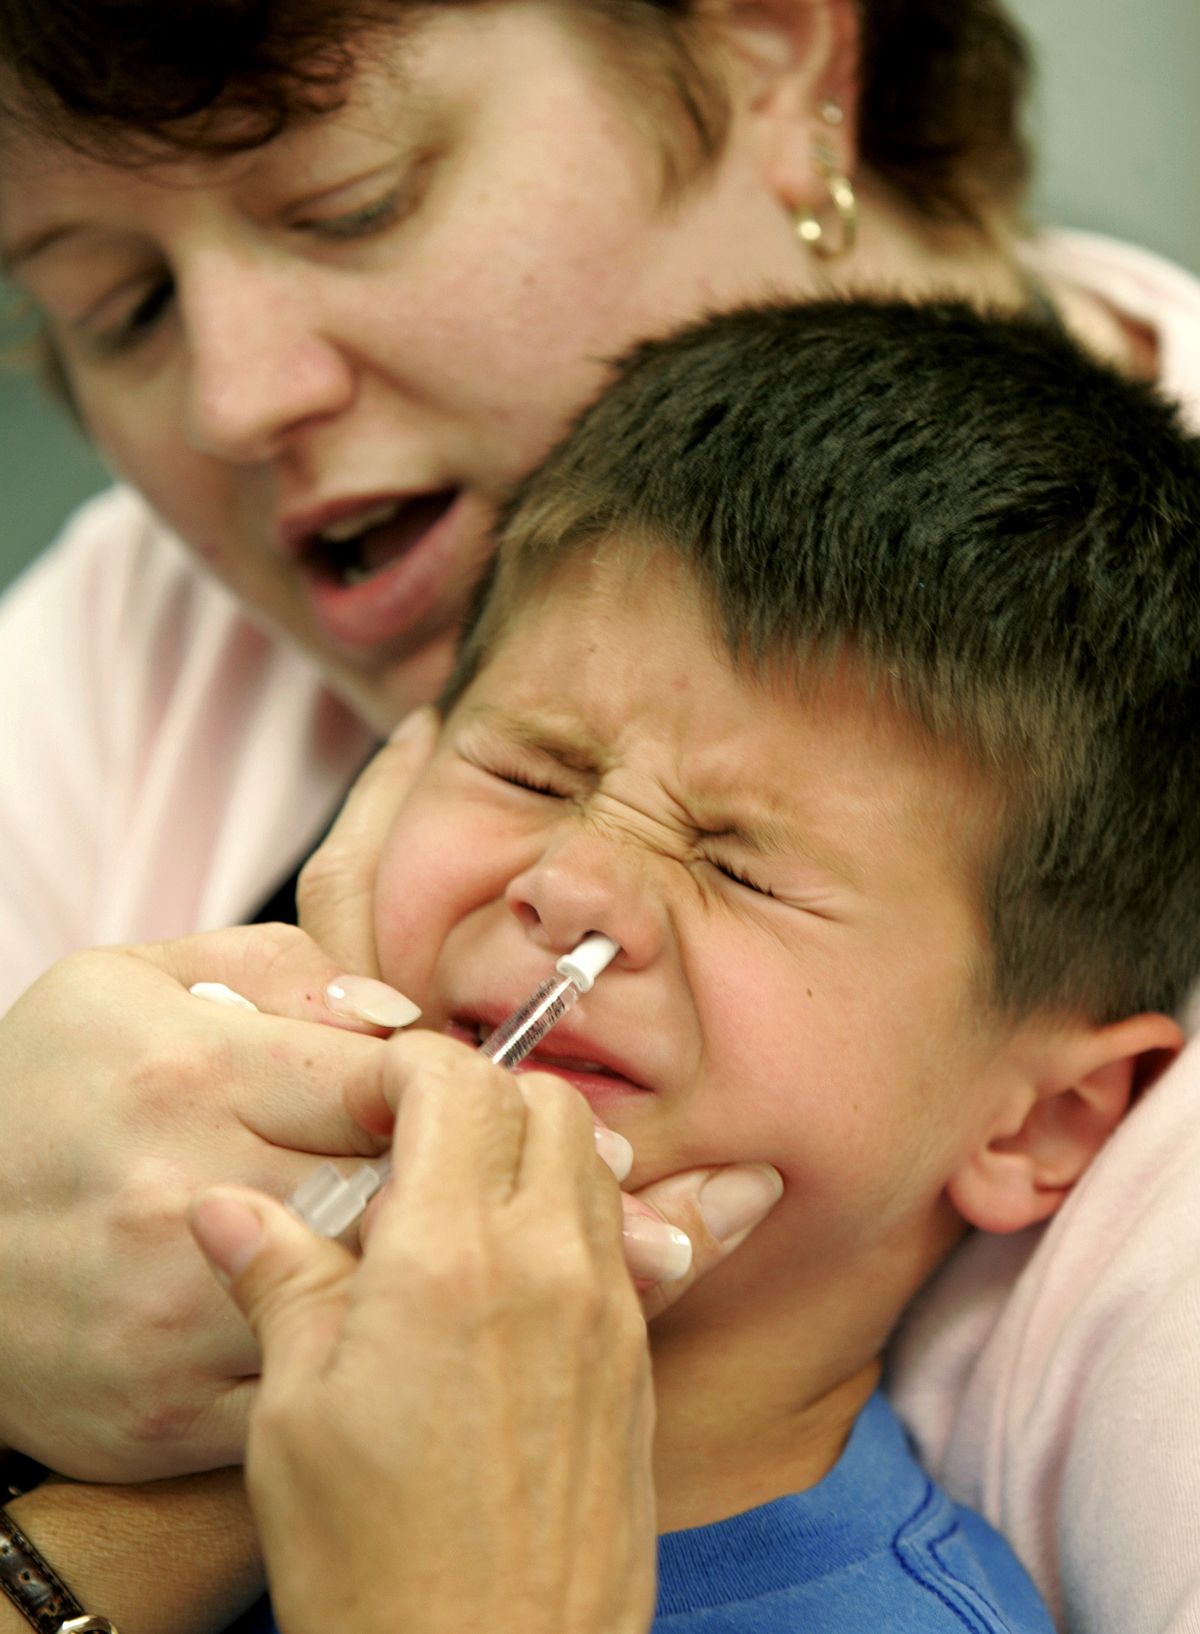 Eric Krex, 6, reacts as he is held by his mother, Margaret, while a nurse gives him a FluMist influenza vaccination  (Photo/Chris Gardner)